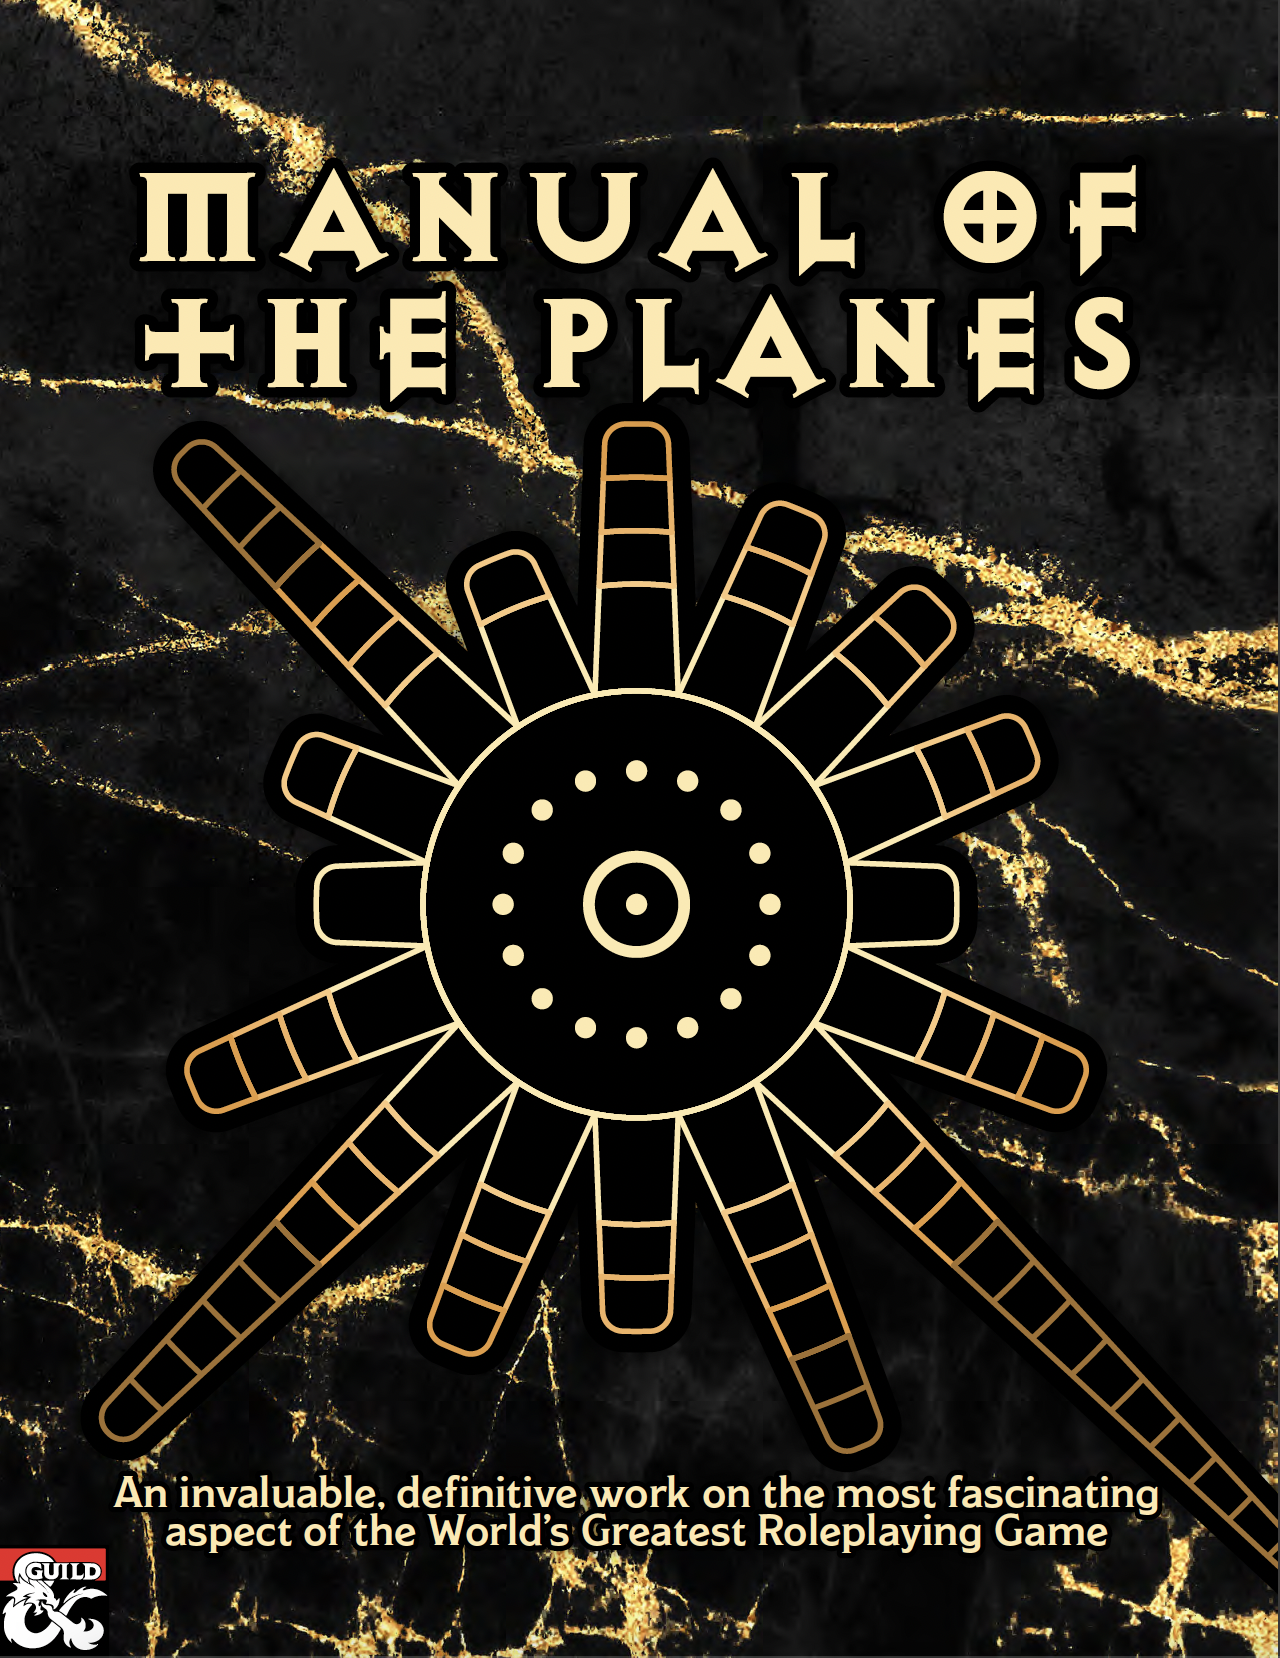 Manual of the Planes. An invaluable, definitive work on the most fascinating aspect of the World's Greatest Roleplaying Game